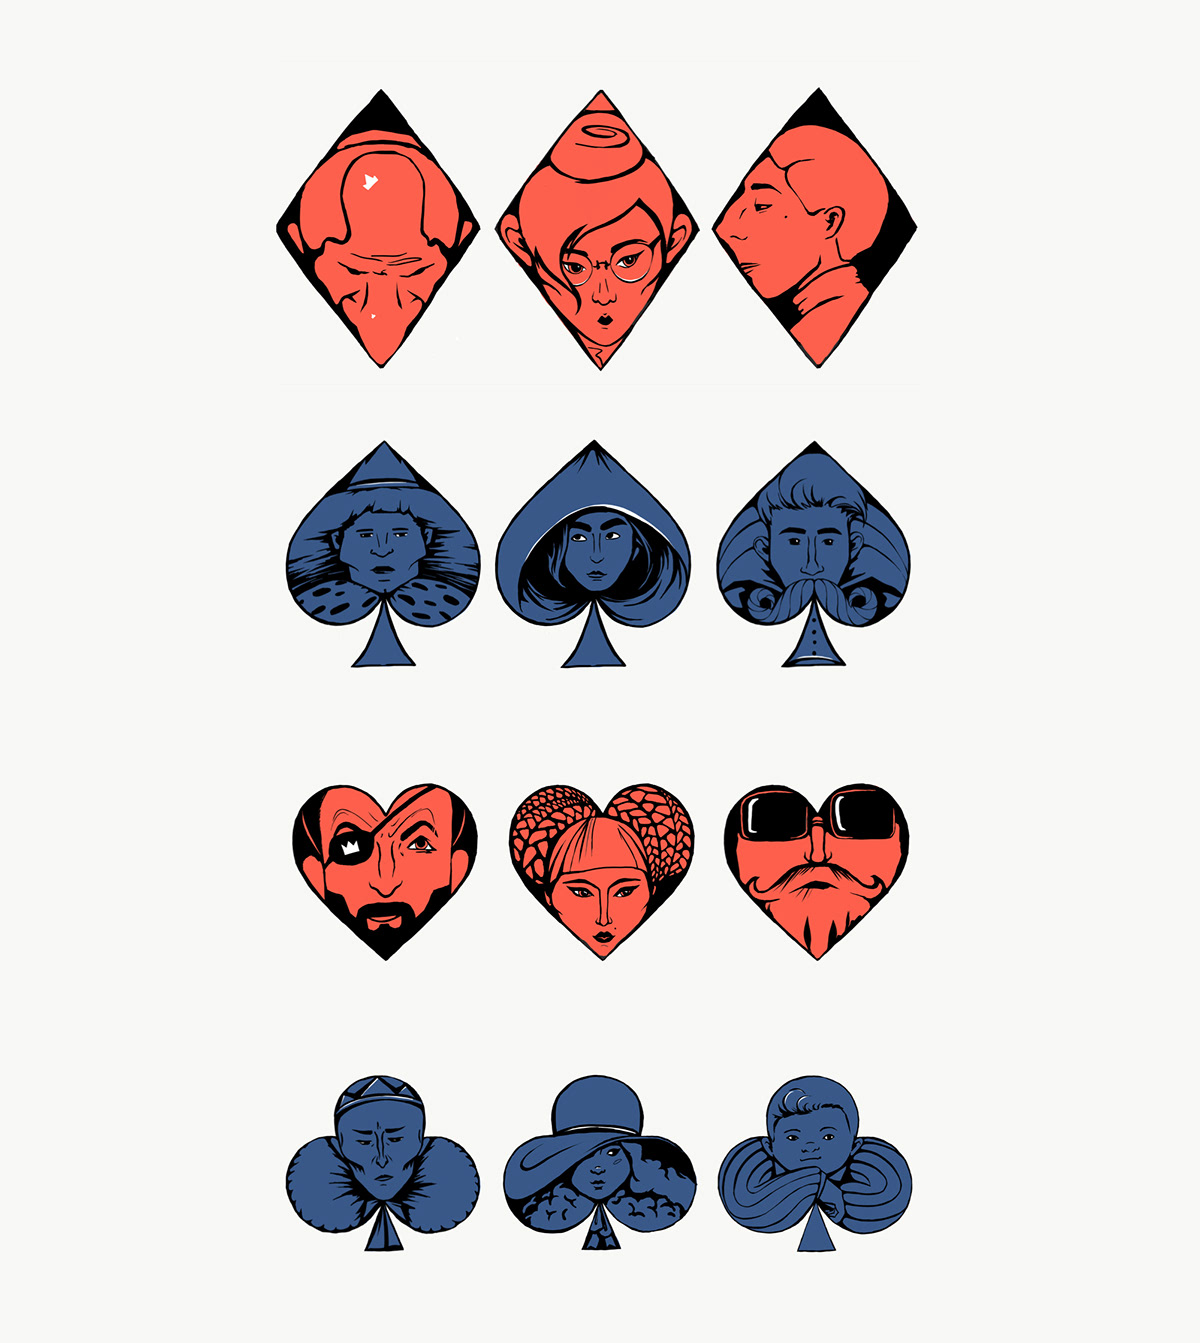 cards Character clubs diamonds hearts jack king pocker queen spades